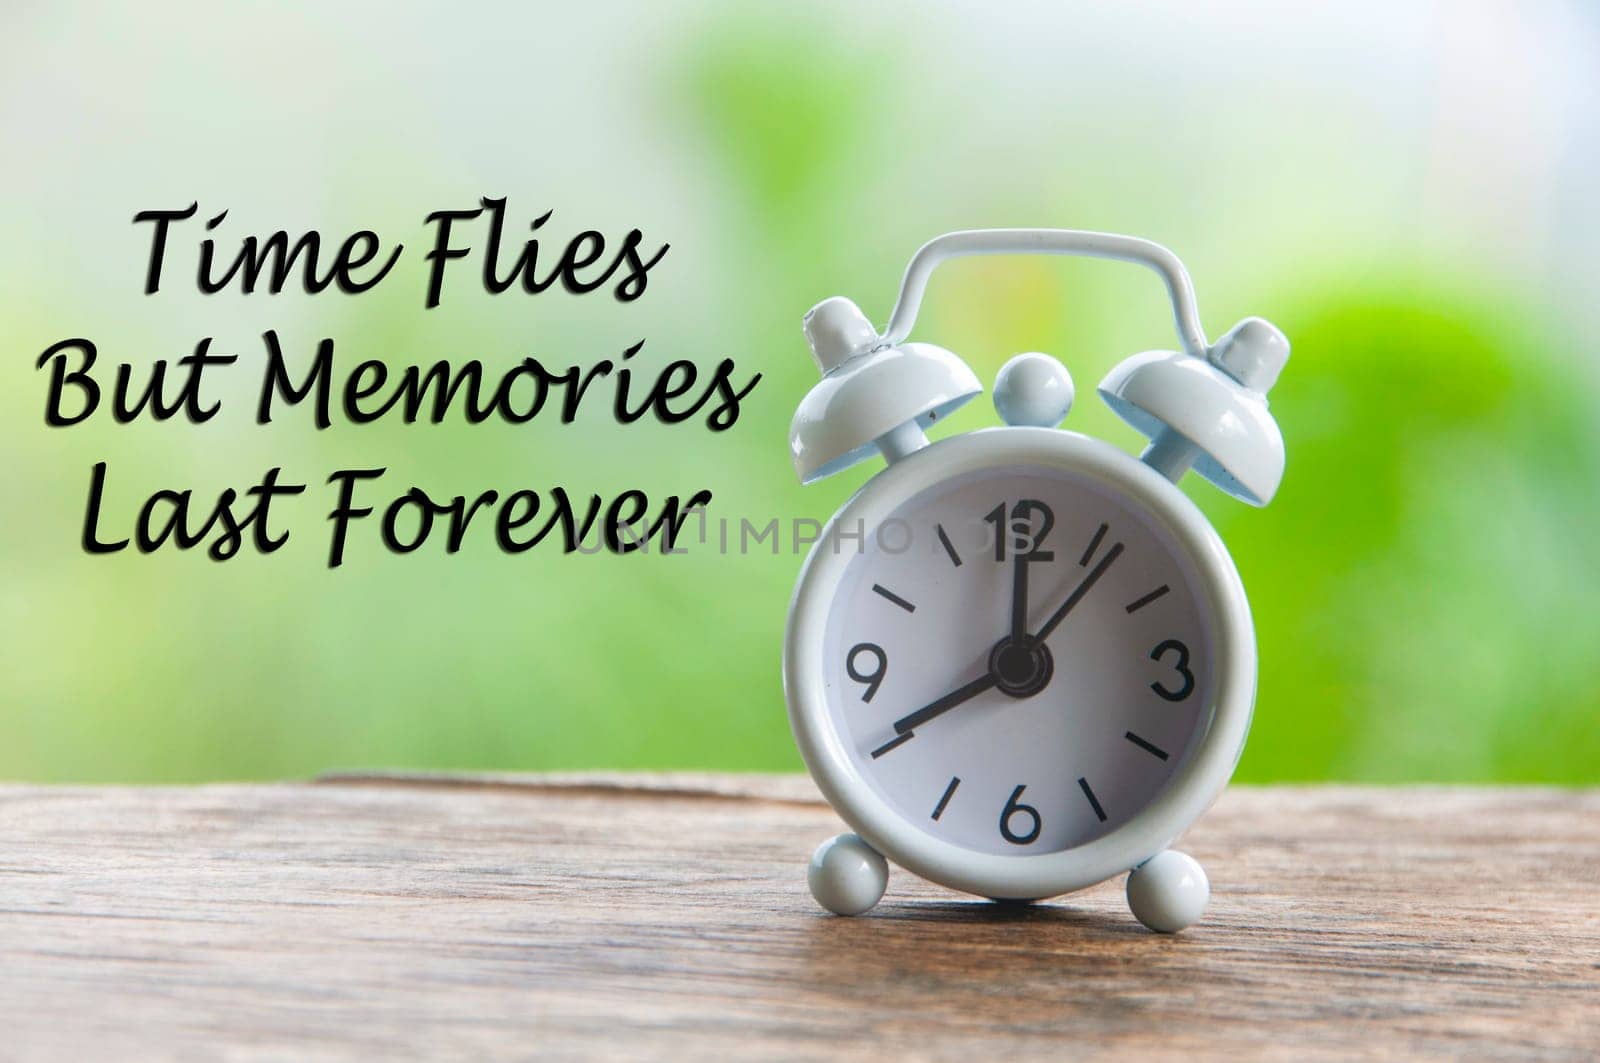 Time flies but memories last forever quote with alarm clock pointing at 8 am. Motivational concepts